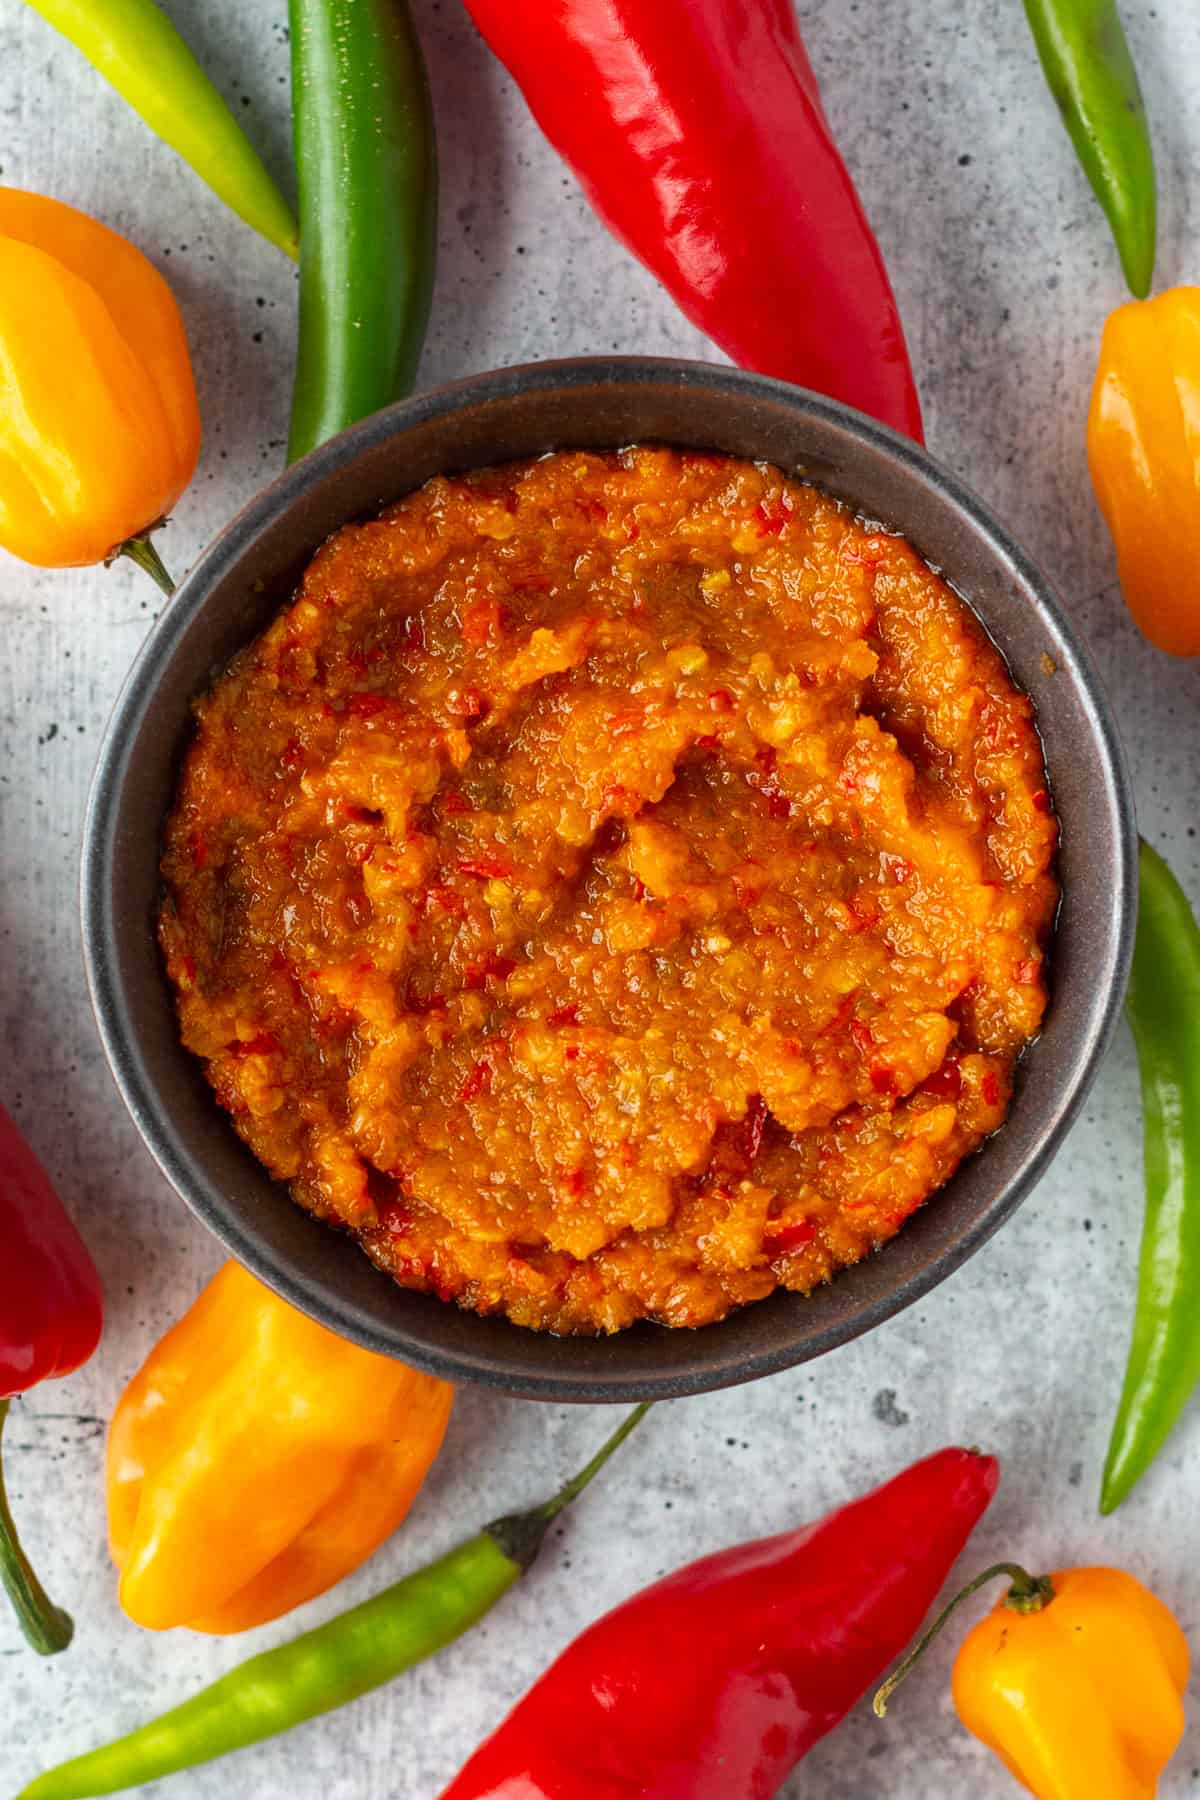 Top view of a bowl of chili paste surrounded by colorful peppers.